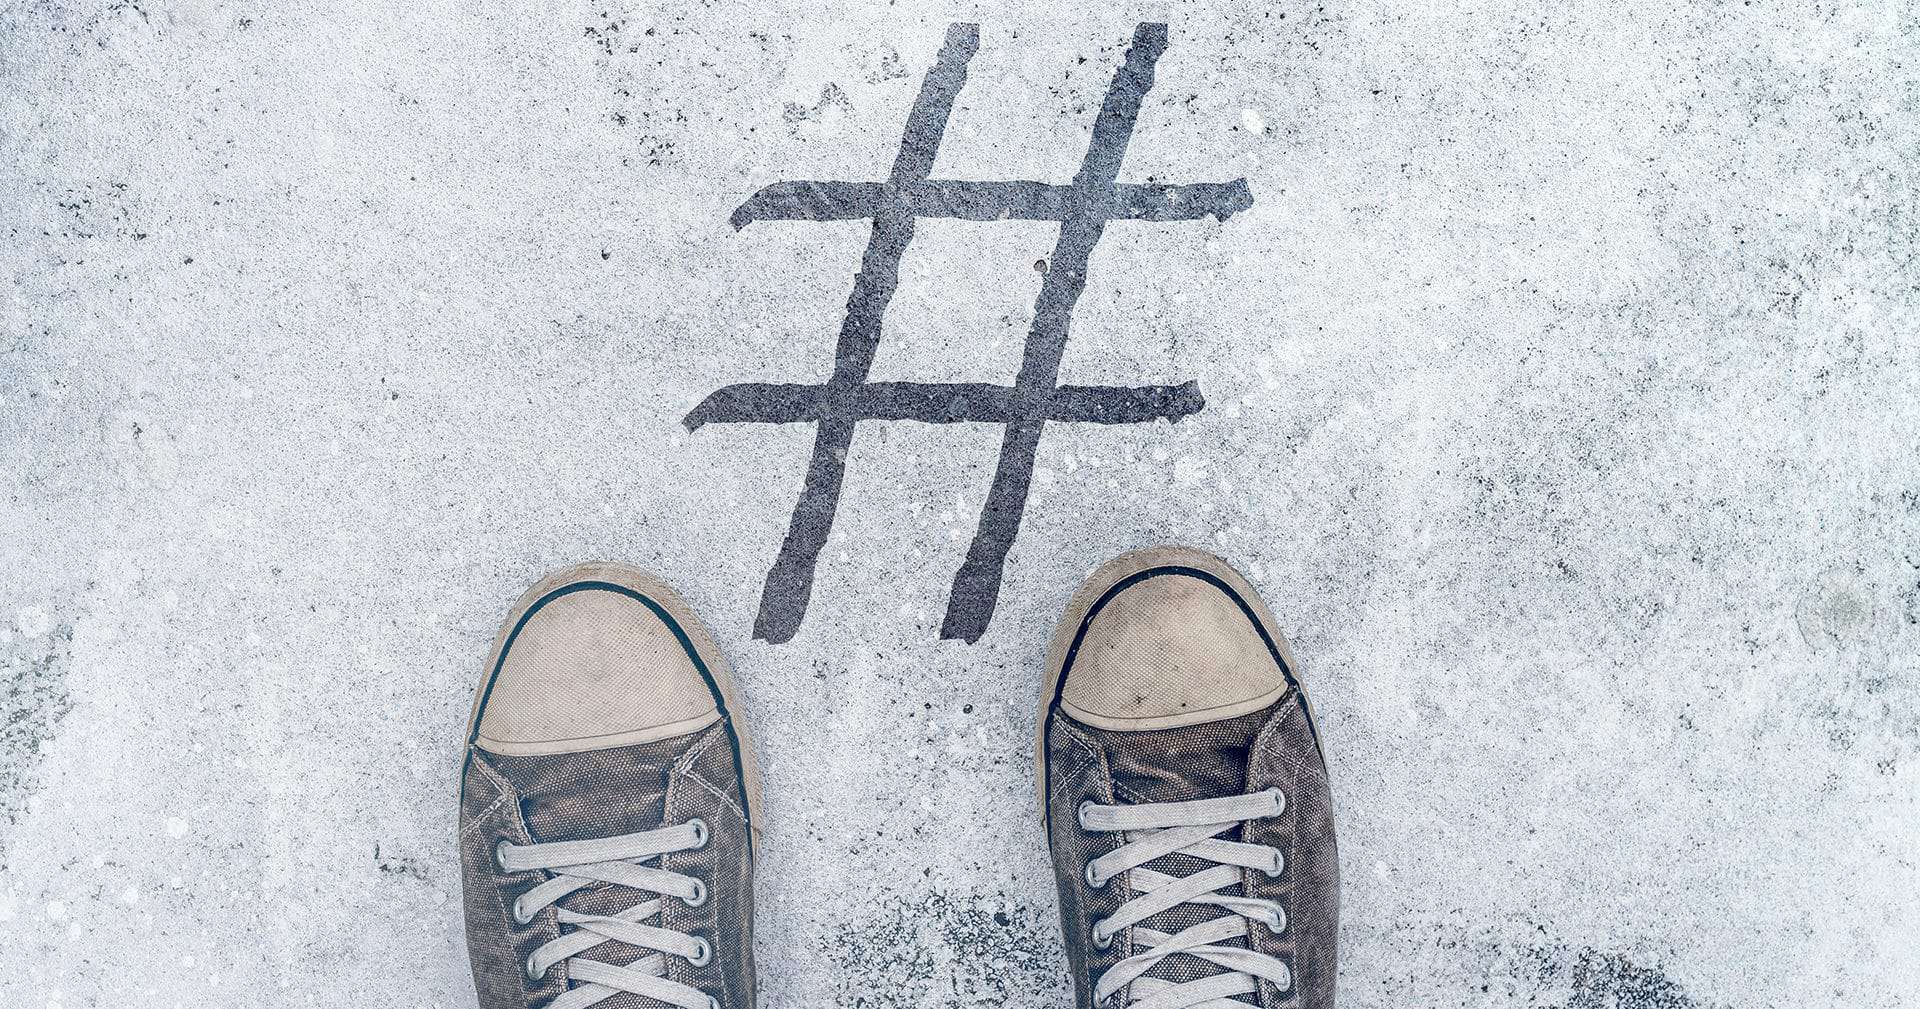 Use-it-or-lose-it-featured-image-feet-standing-over-hashtag-imprint-on-street